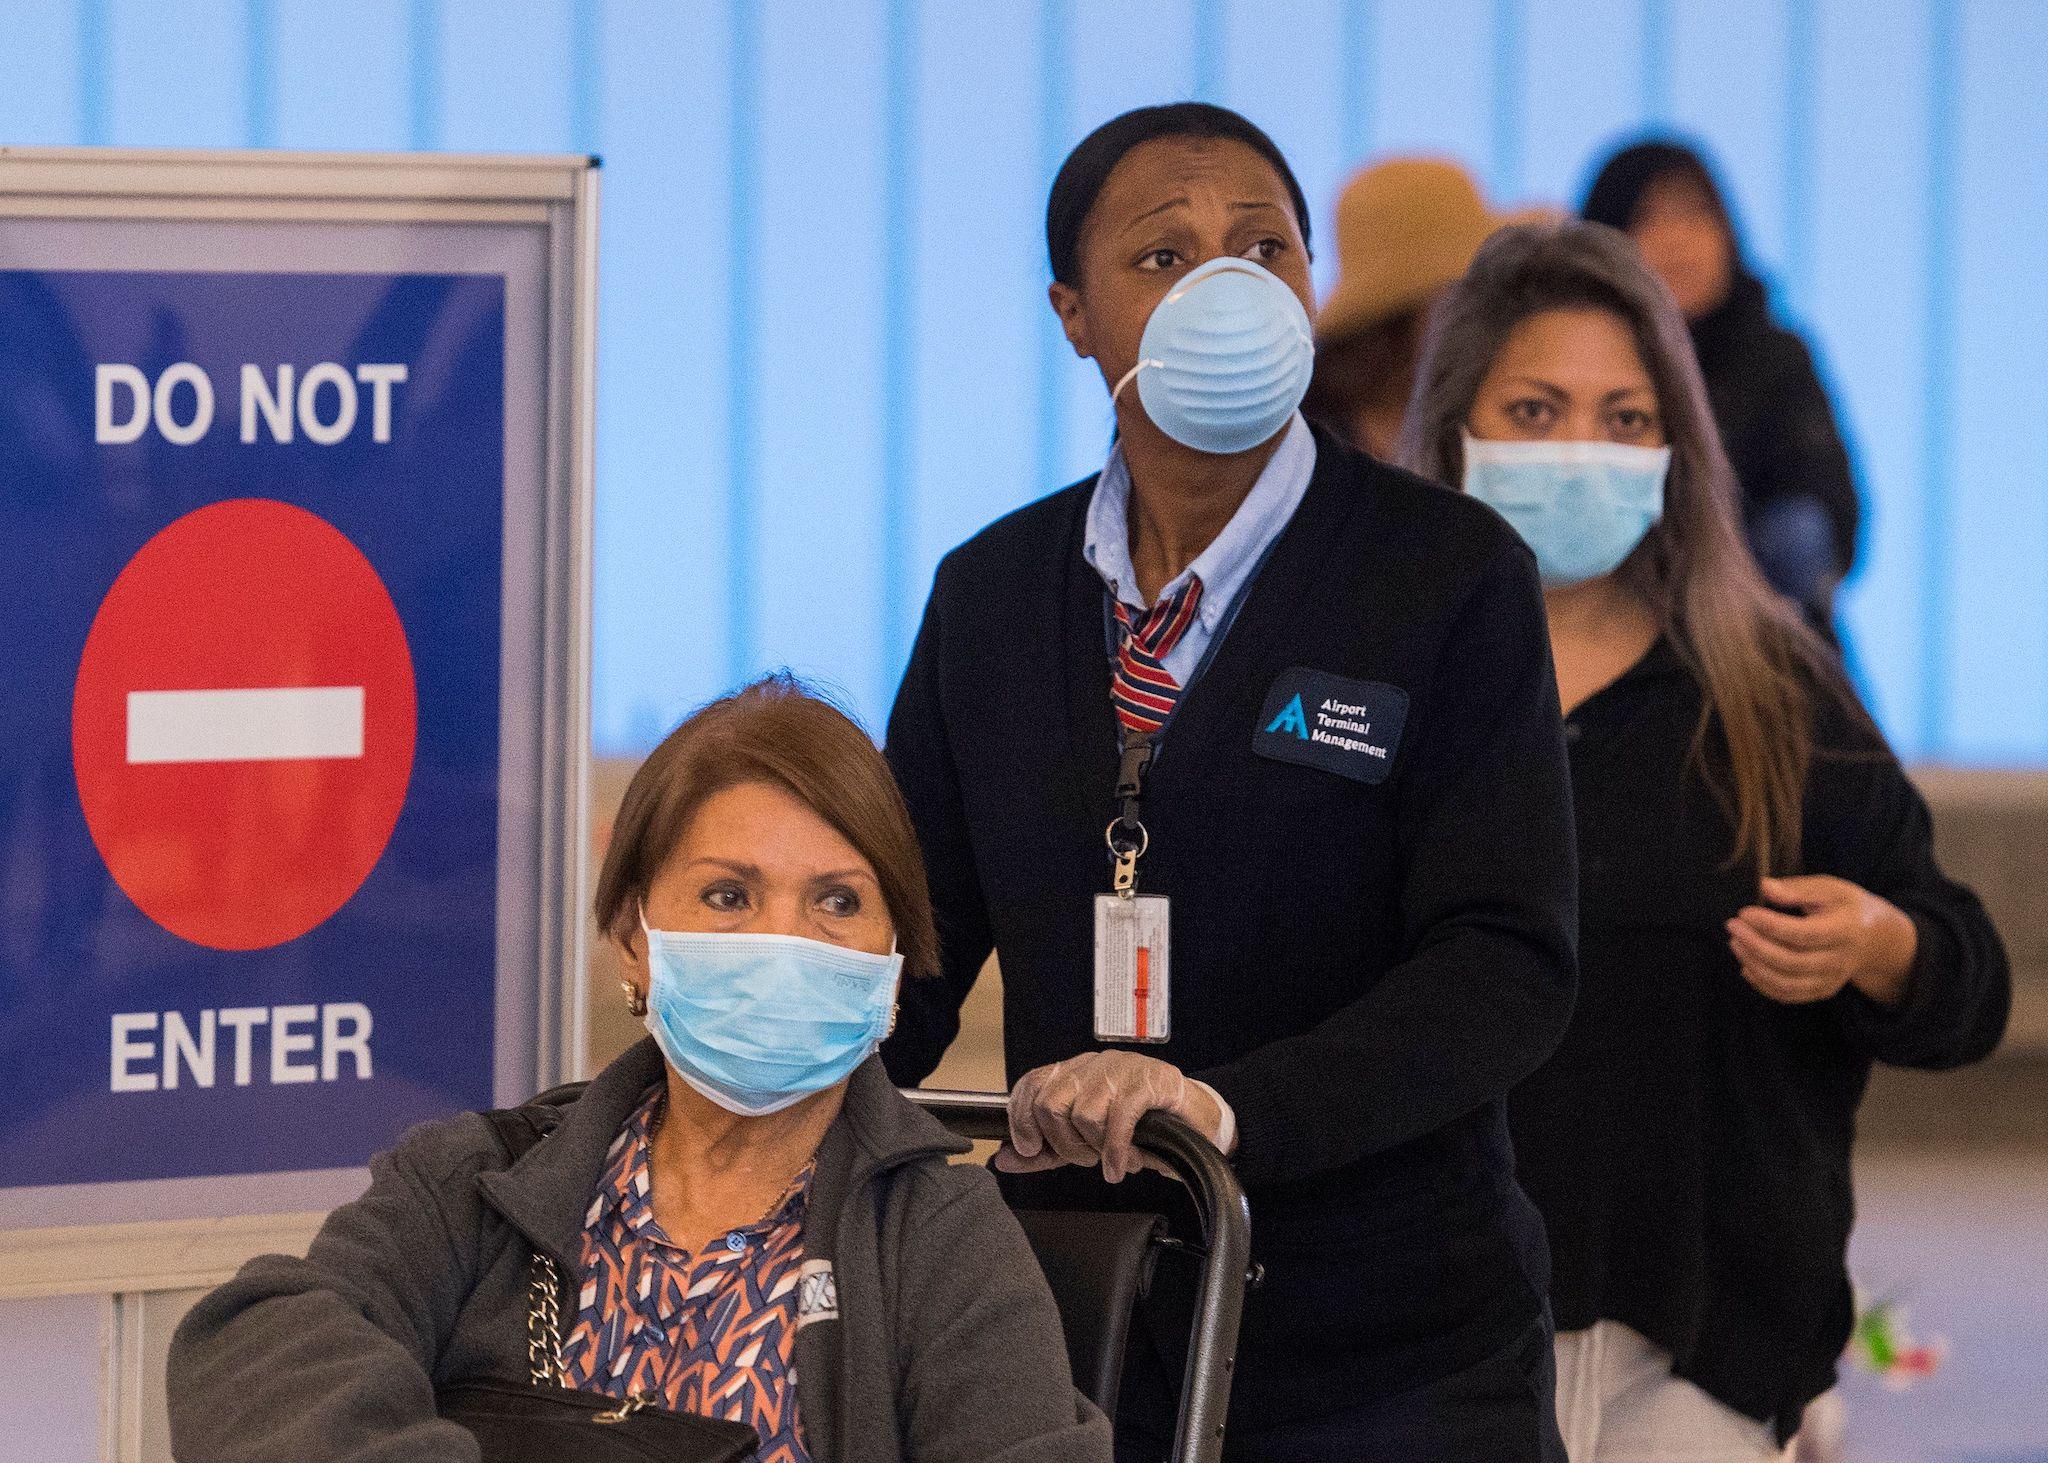 Passengers wear face masks to protect against the COVID-19 (Coronavirus) after arriving at the LAX airport in Los Angeles, California on March 5, 2020